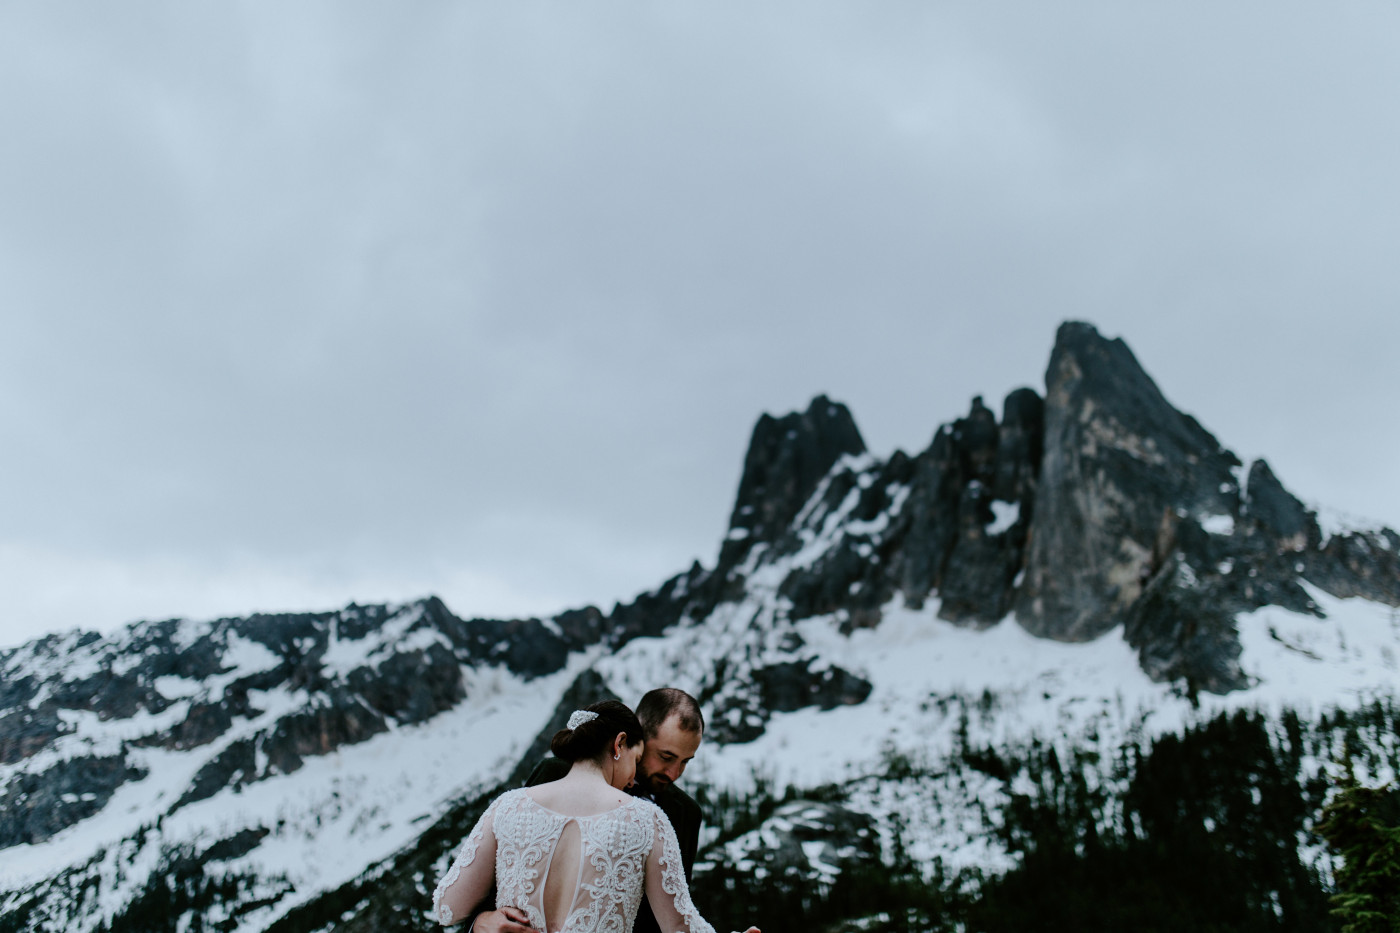 Alex and Elizabeth dancing. Elopement photography at North Cascades National Park by Sienna Plus Josh.